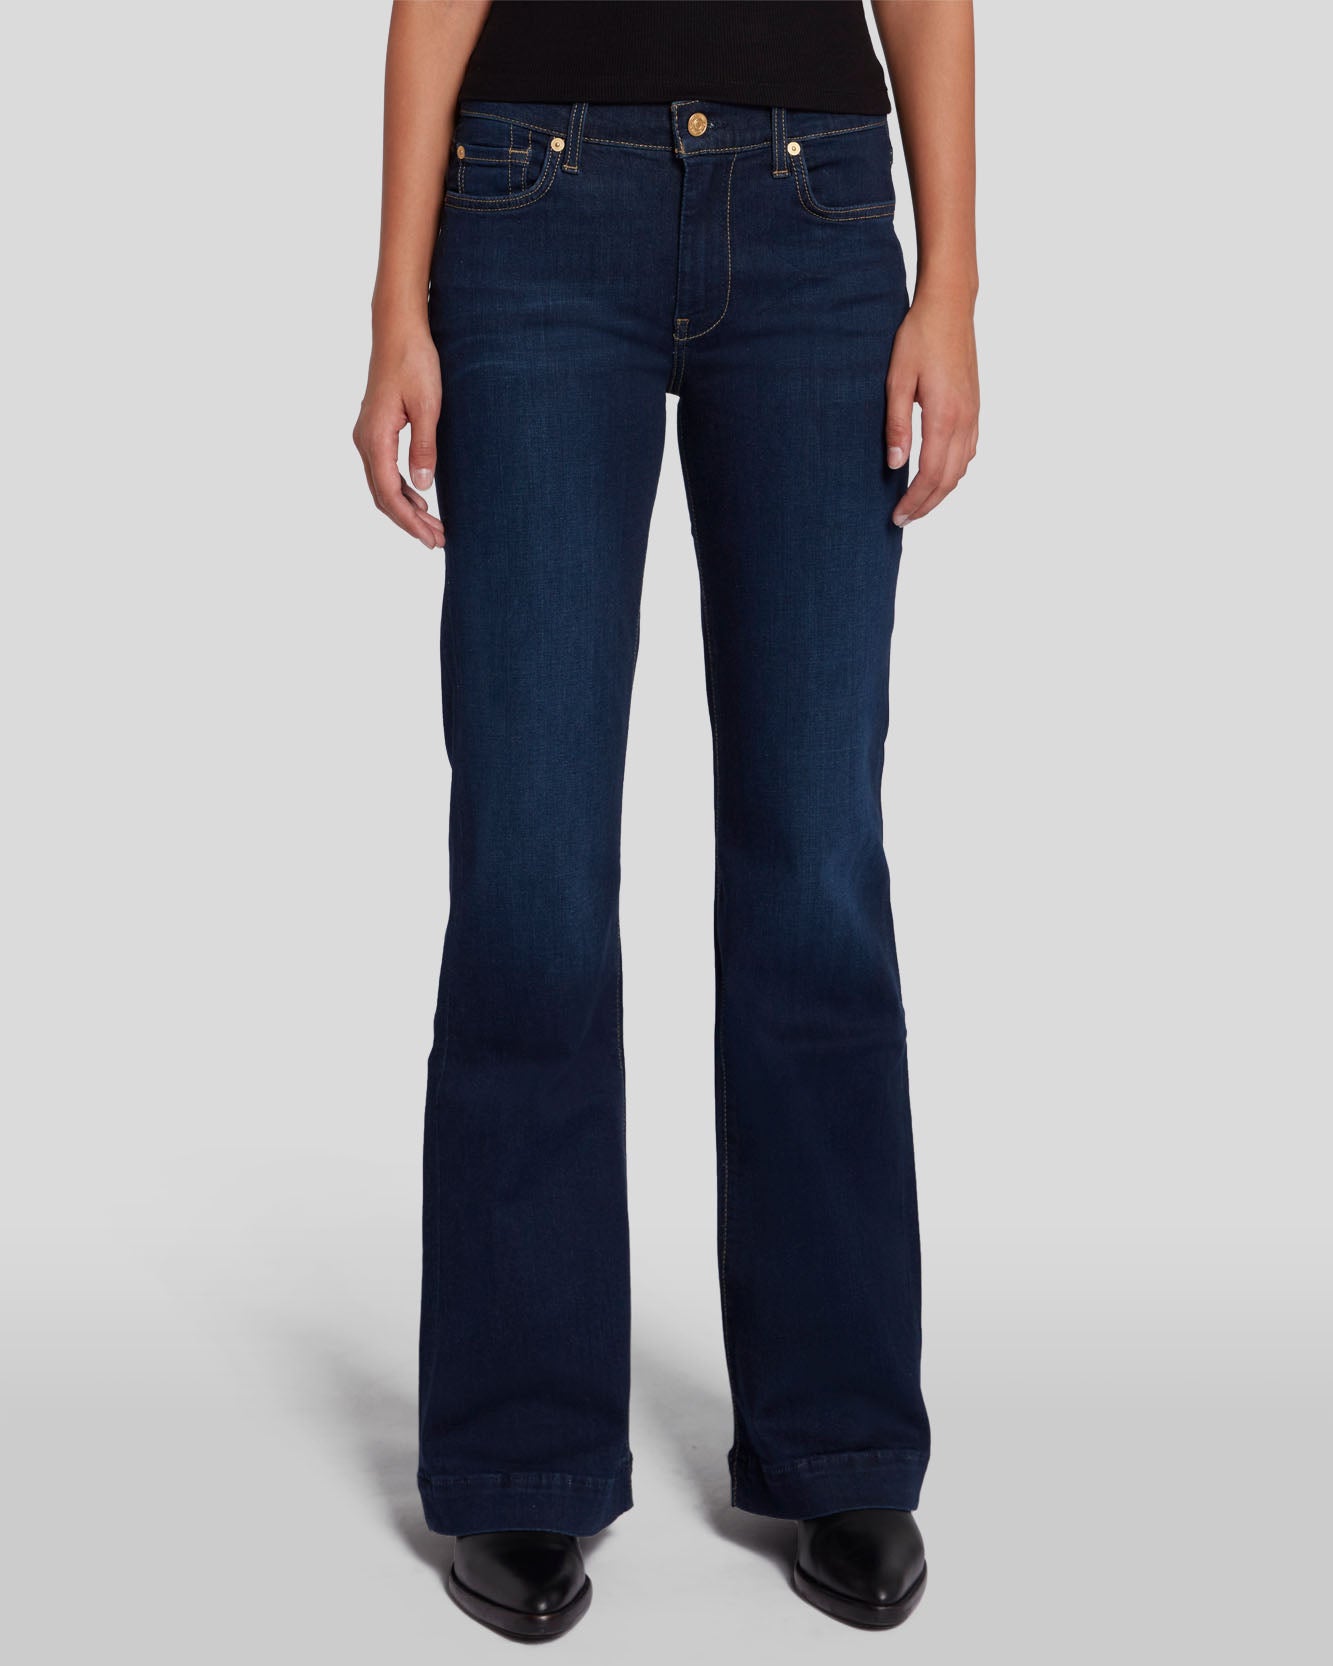 Dojo Tailorless Womens Jeans by 7 For All Mankind